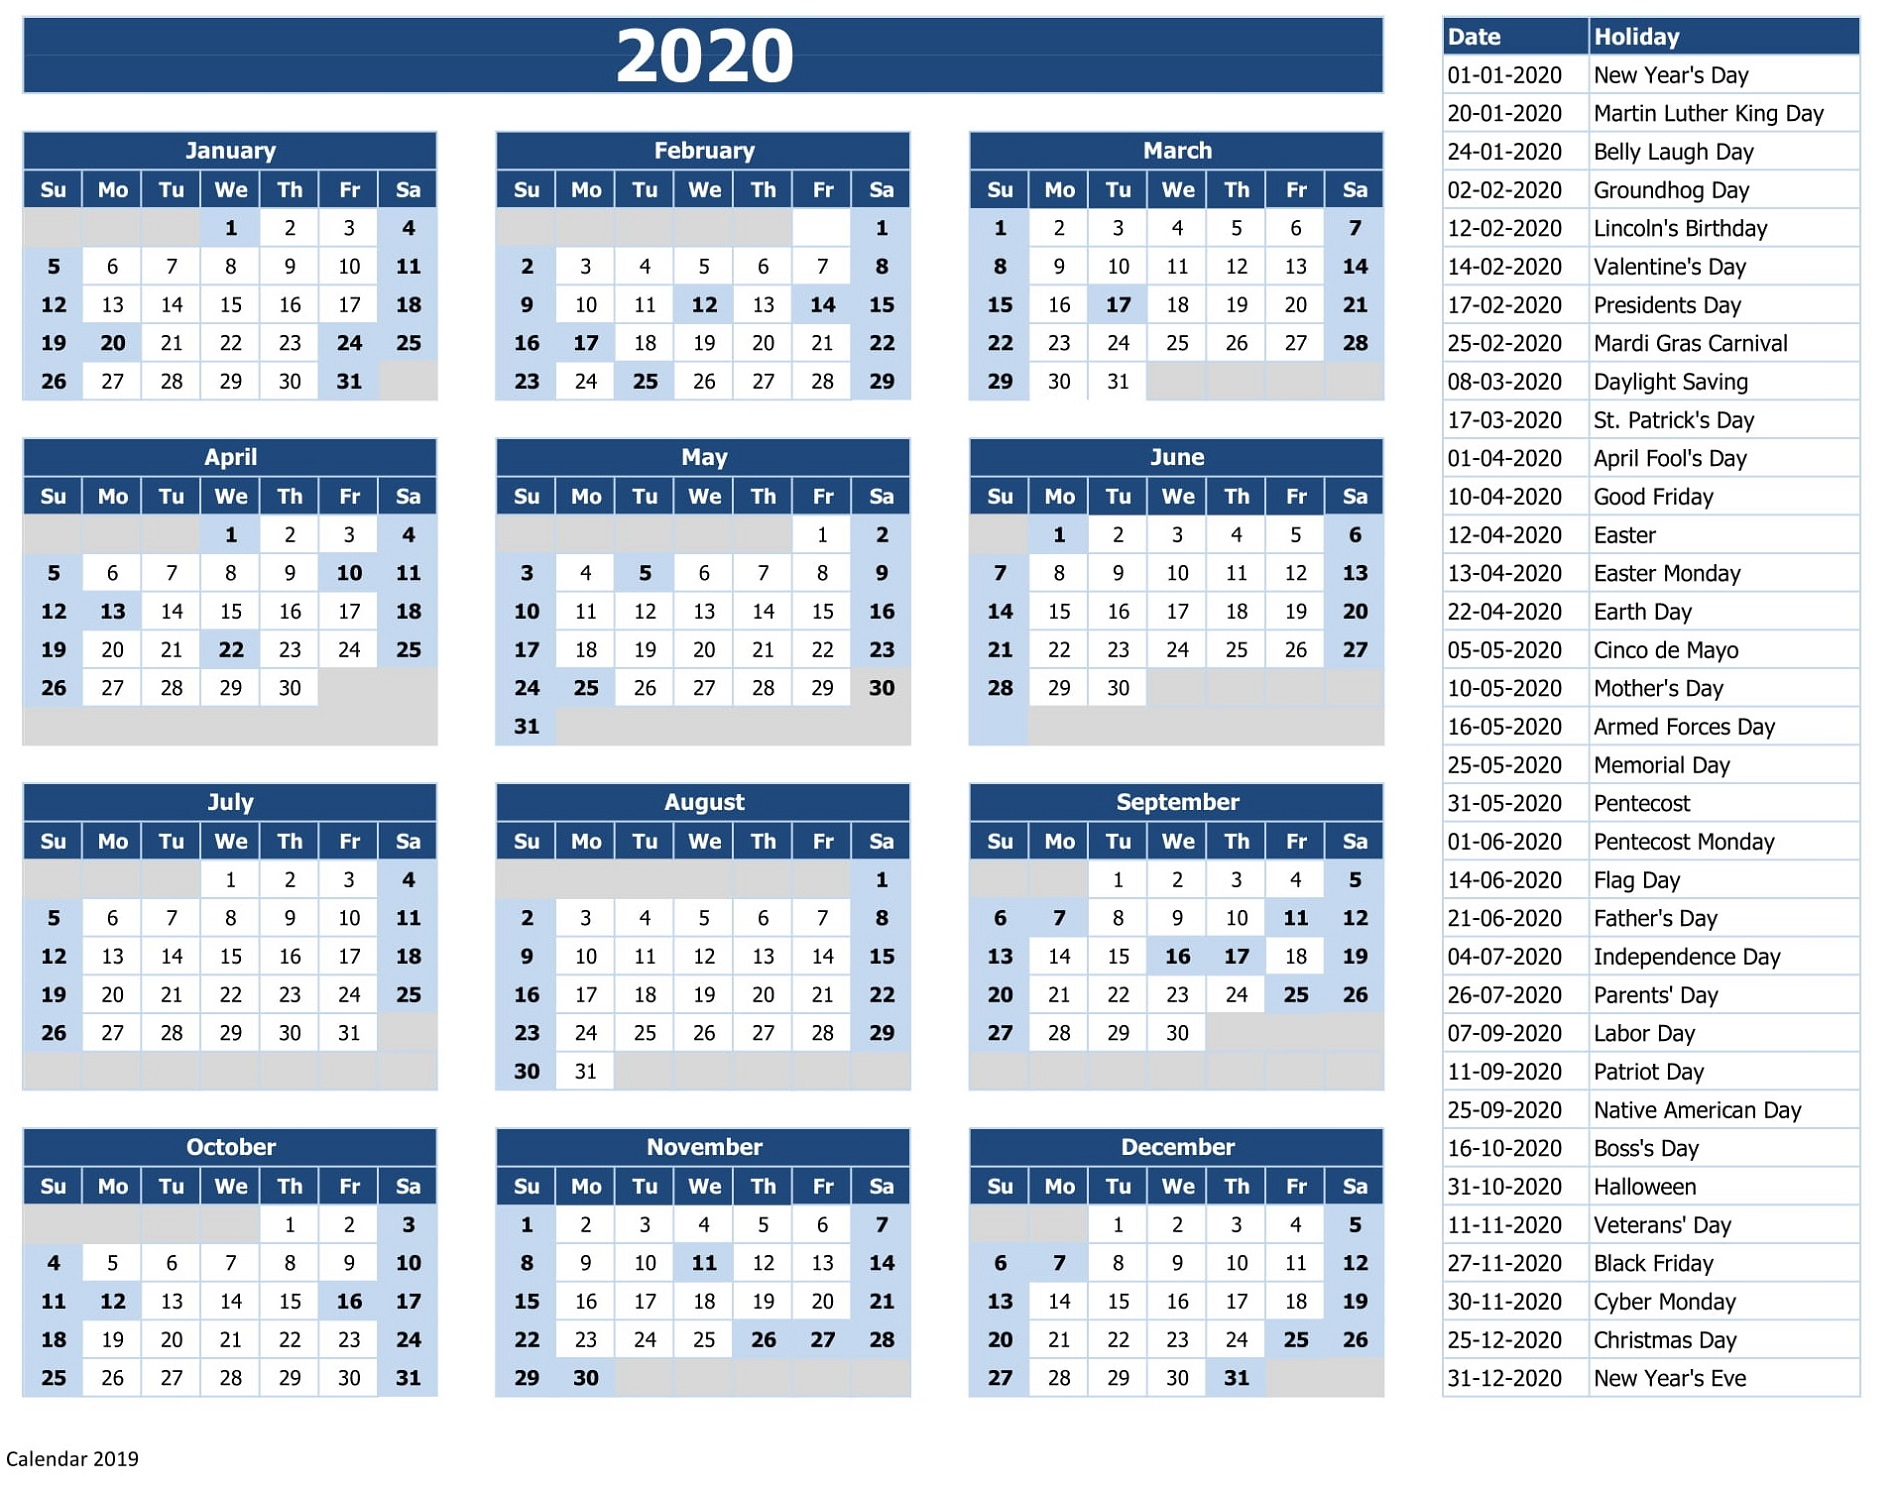 2020 Calendar With Holidays Excel - Wpa.wpart.co